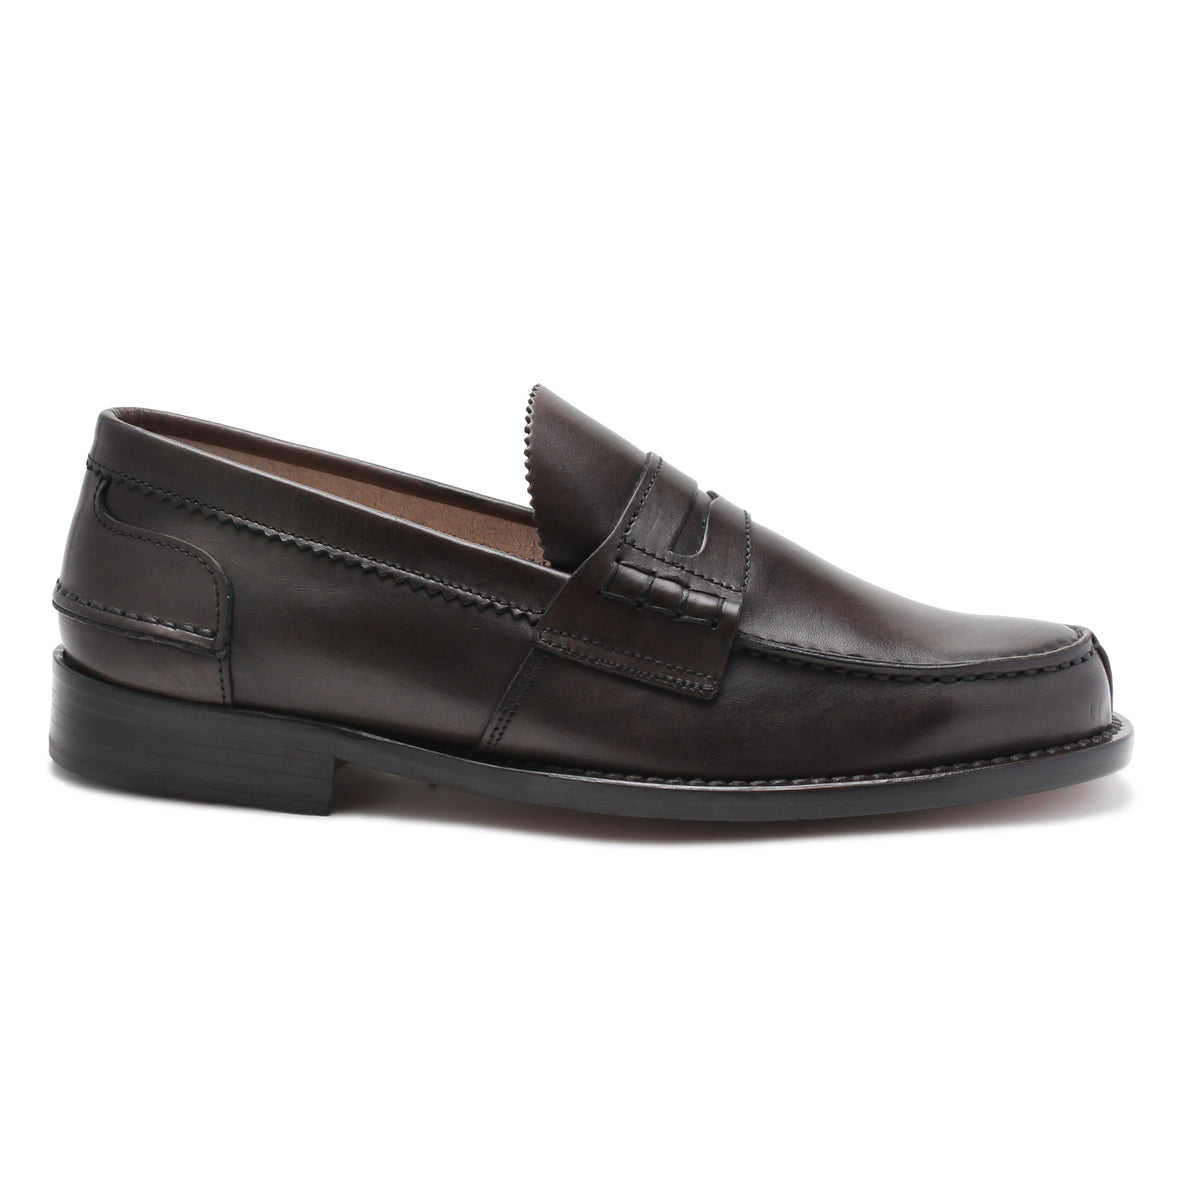 Saxone of Scotland Dark Brown Leather Mens Loafers Shoes